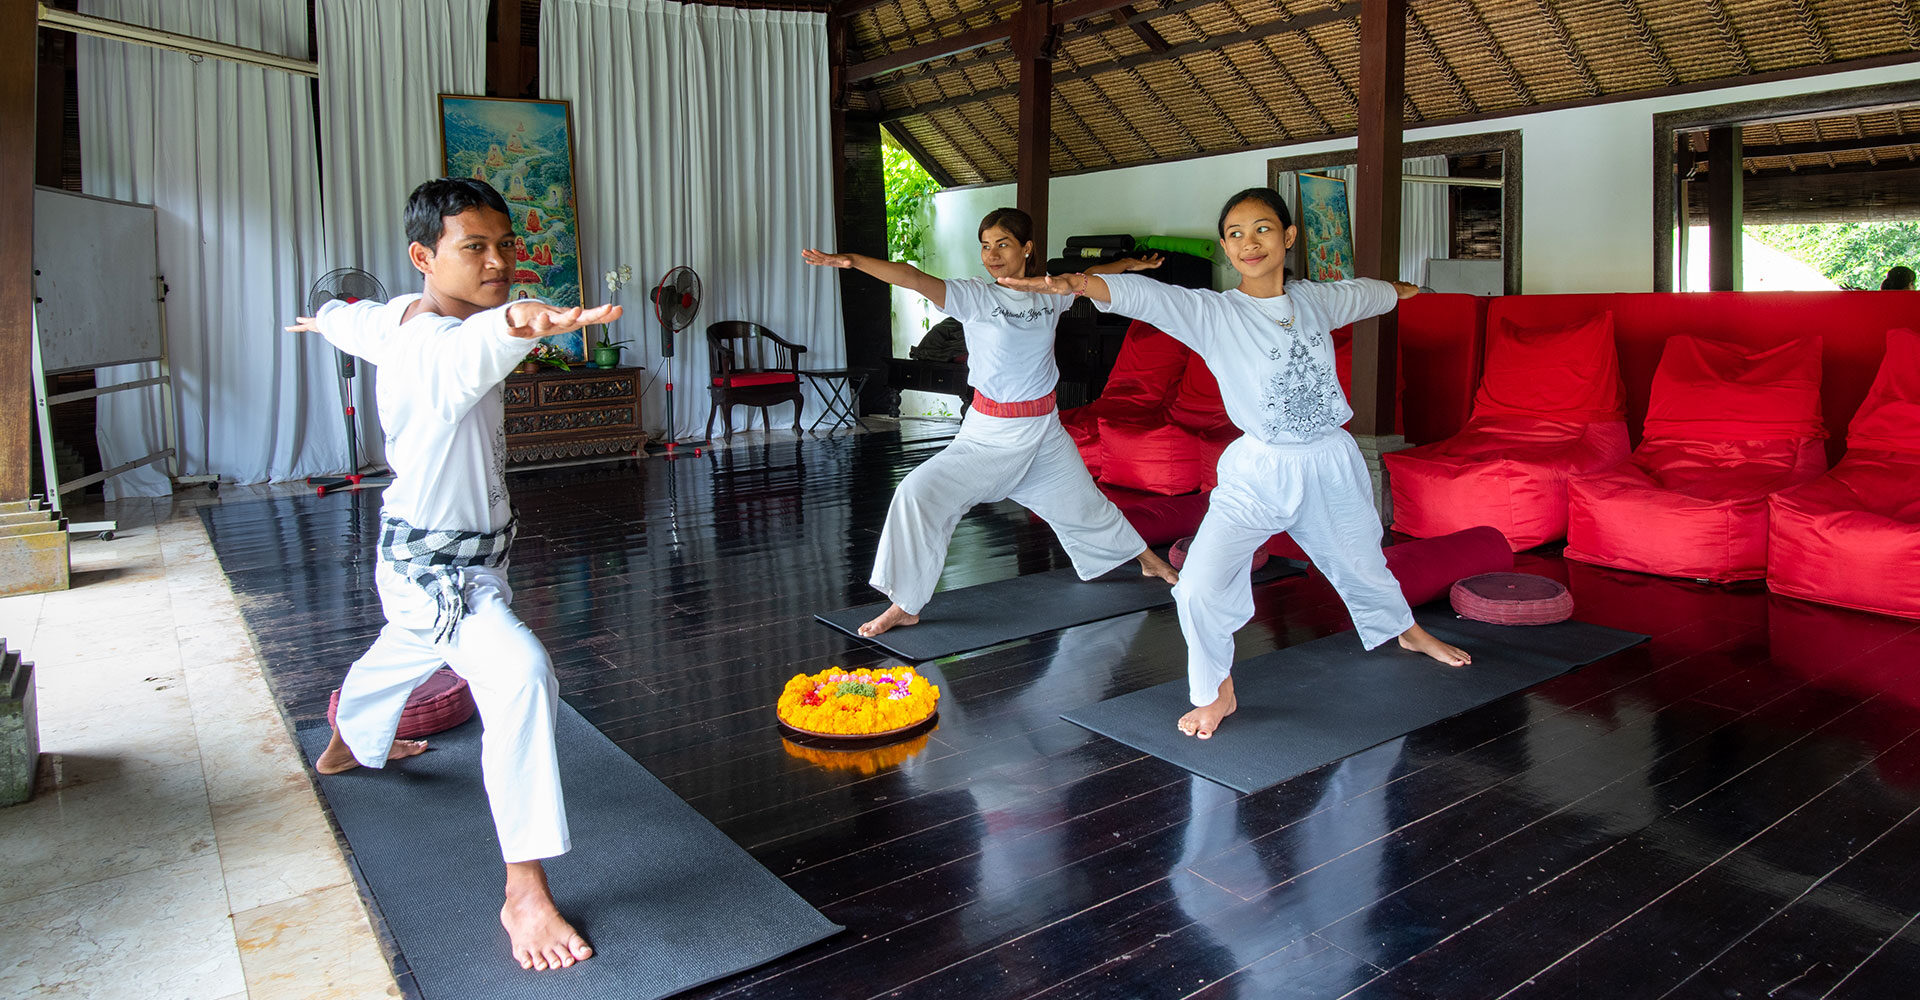 A private yoga class for two at Sukhavati Ayurvedic Wellness Retreat in Bali as part of our luxury programs.